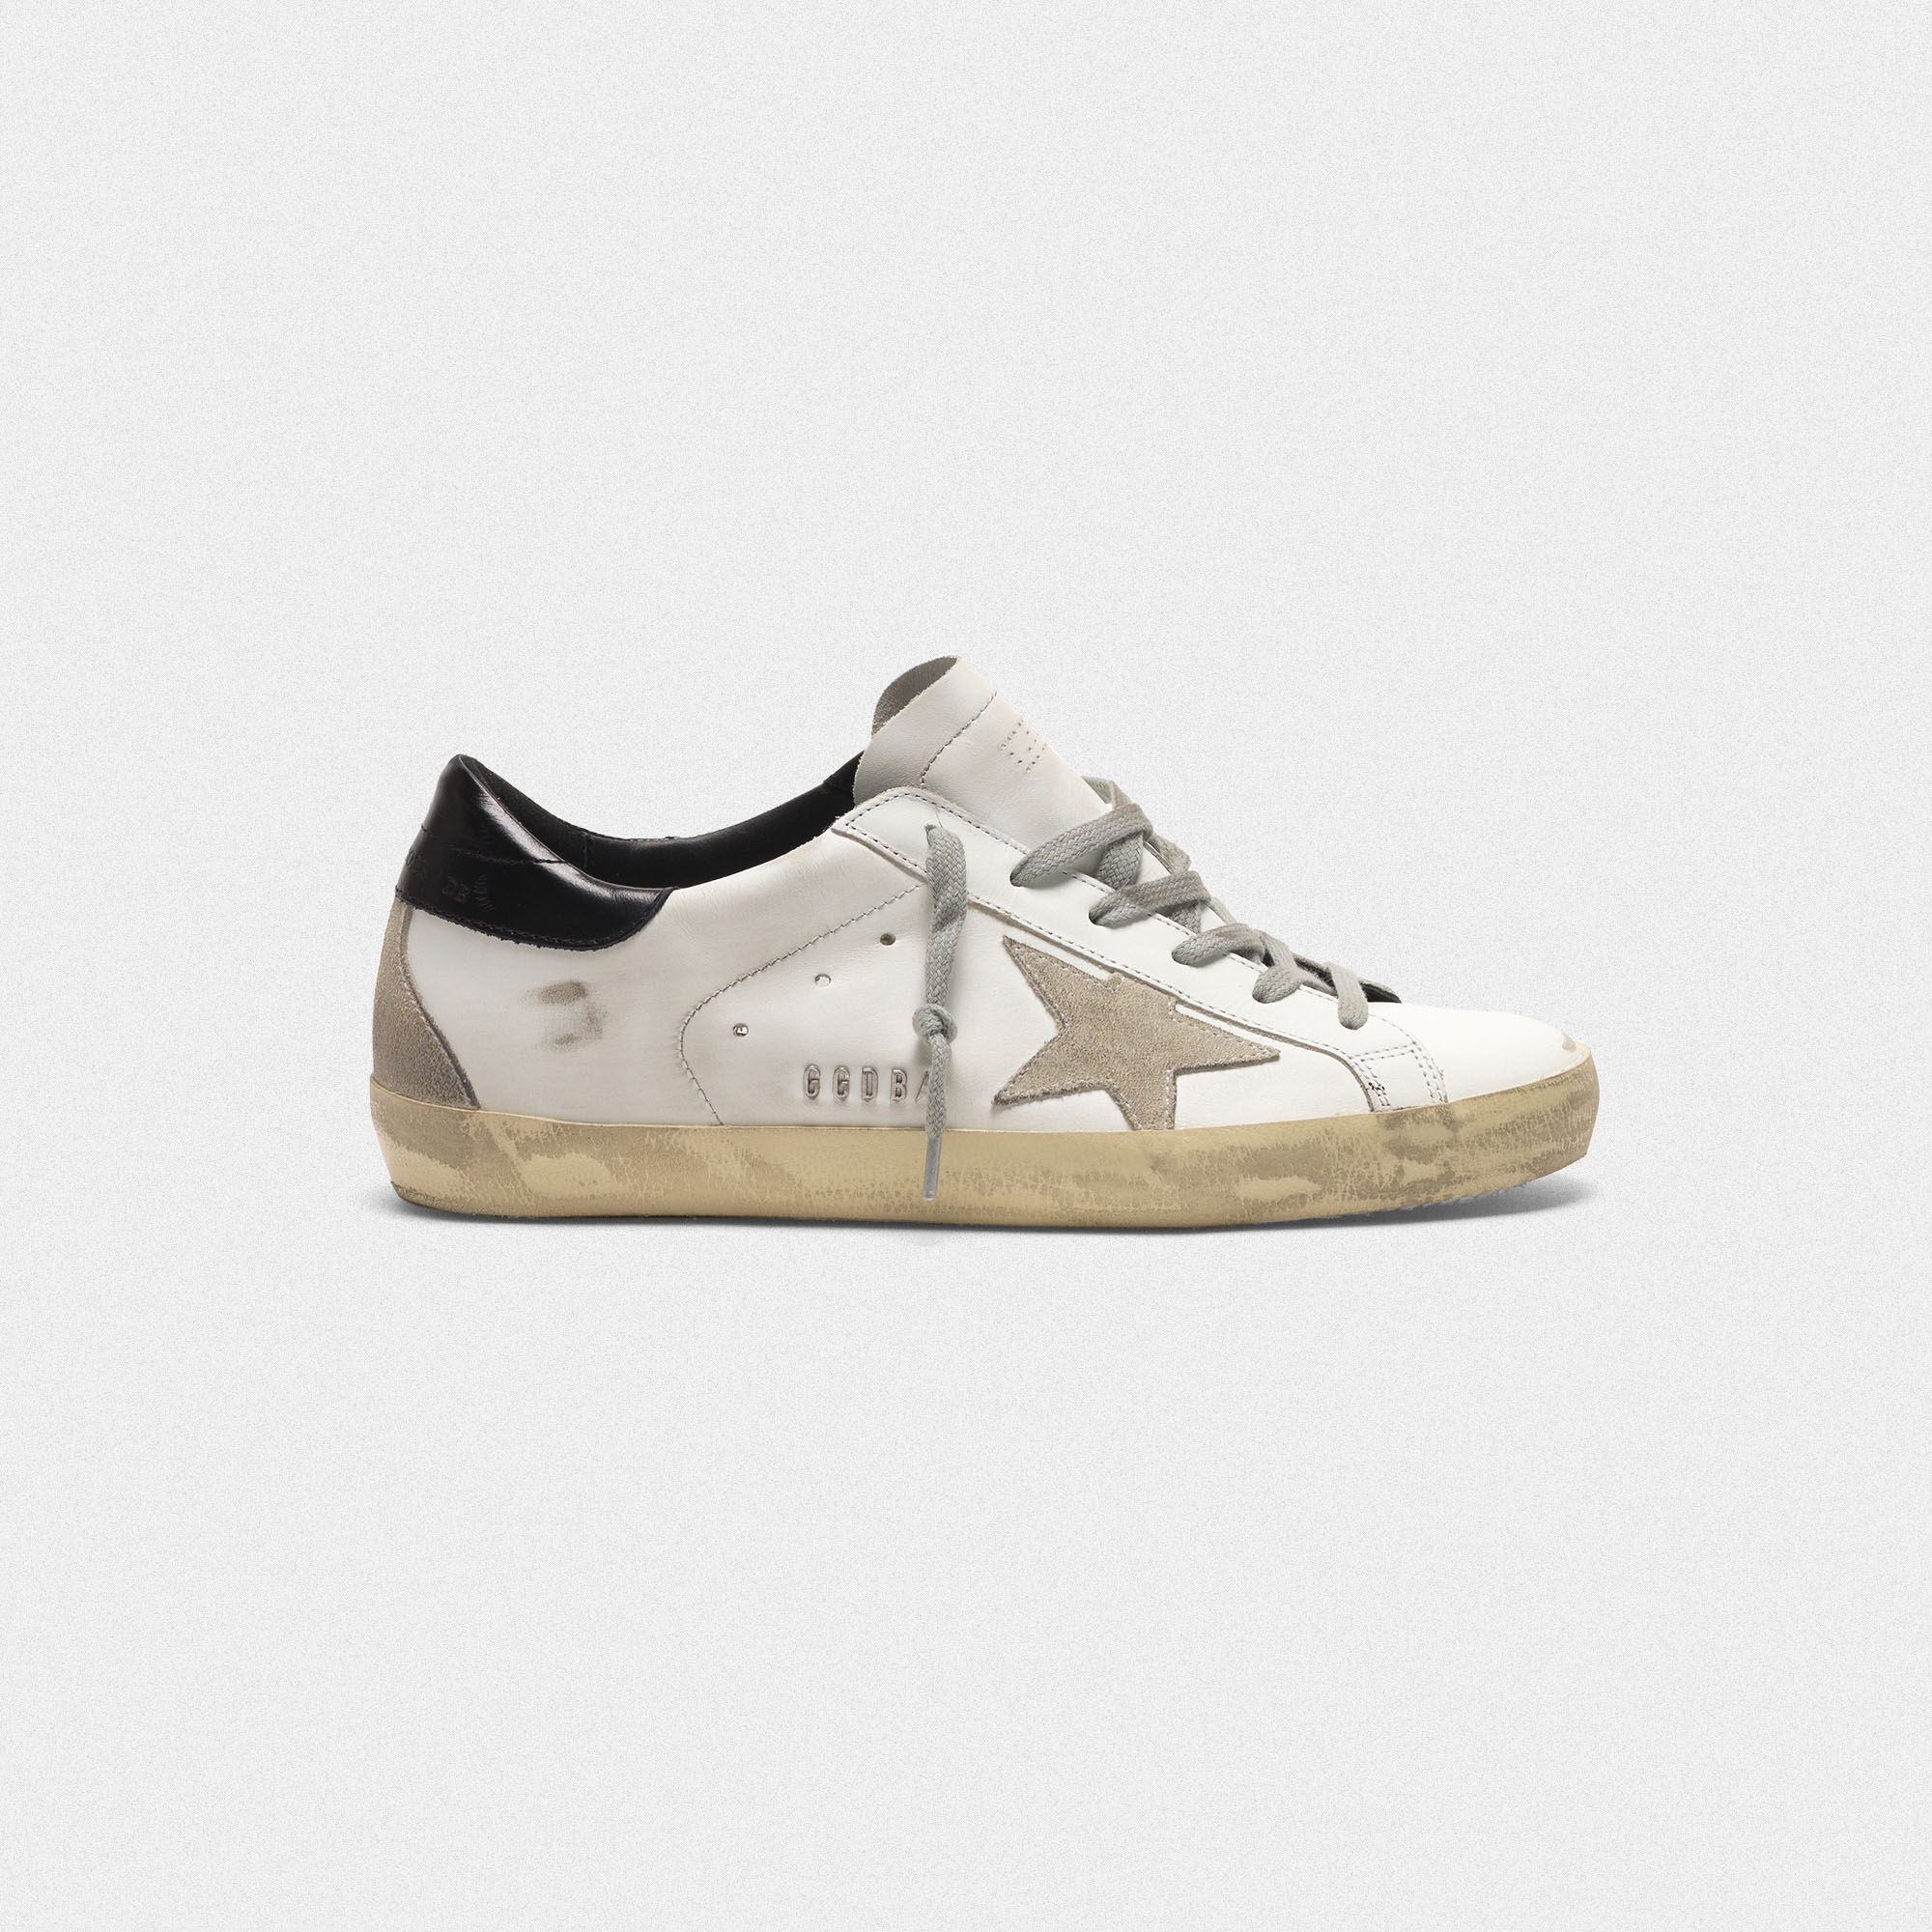 golden goose white and black superstar sneakers